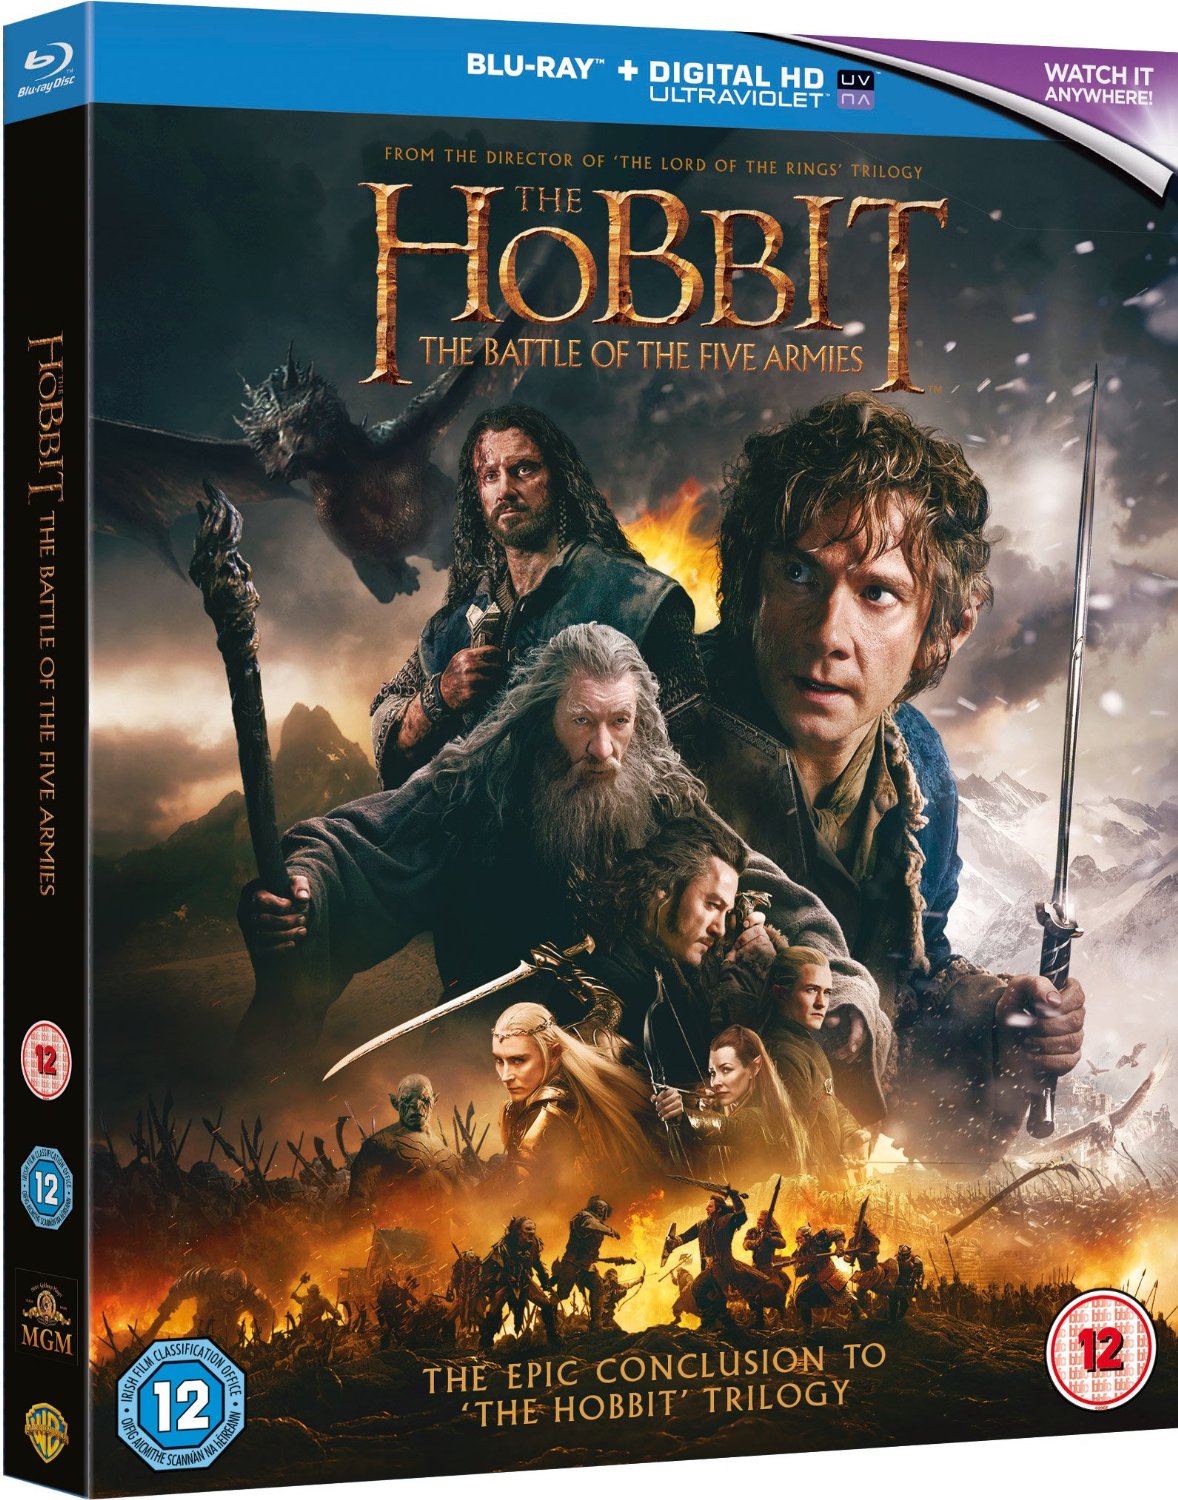 The Hobbit: The Battle of the Five Armies Blu-ray review